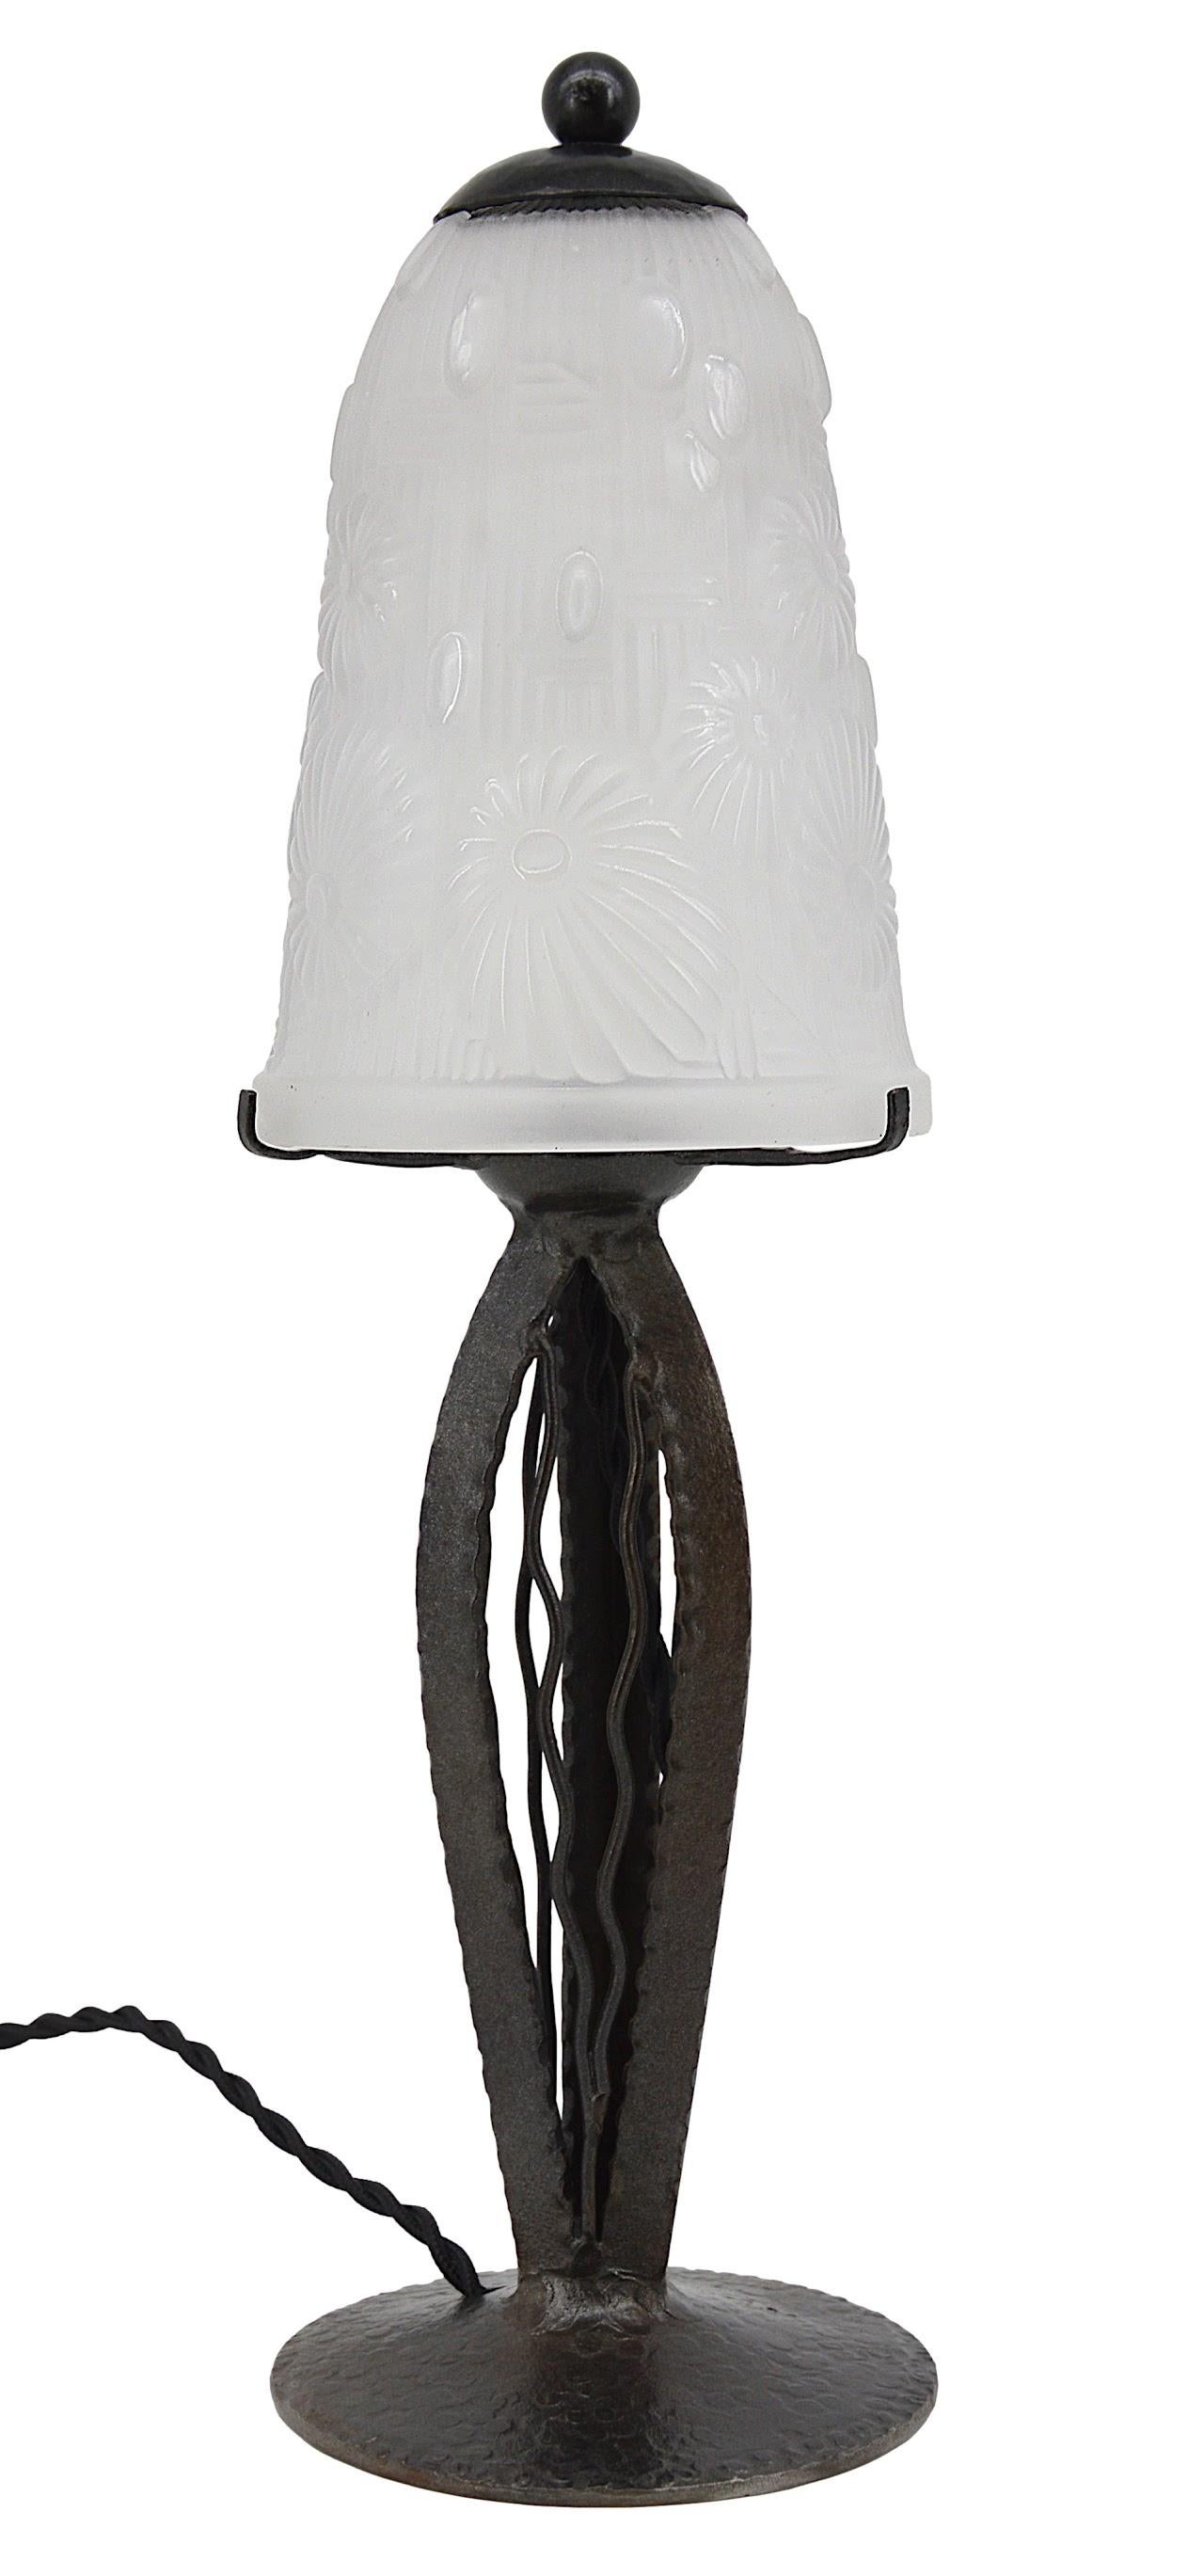 French Art Deco table lamp by Daum (Croismare, Nancy), France, ca. 1930. White frosted glass shade with a stylized floral pattern. Wrought-iron base. Height: 14